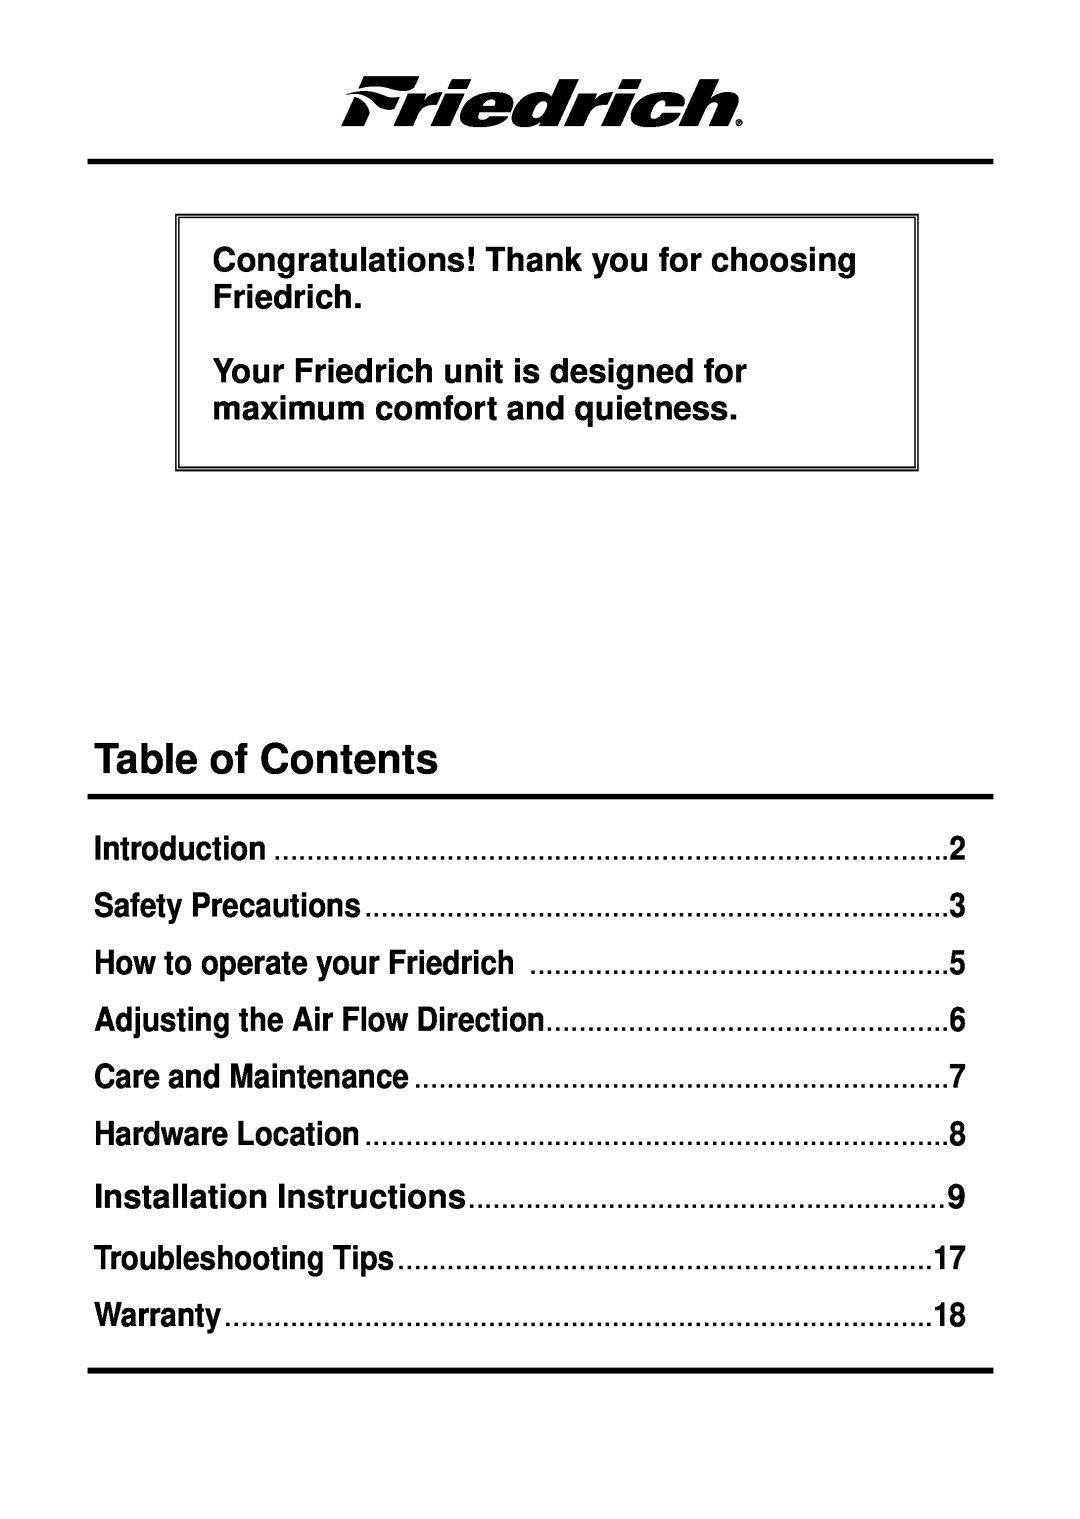 Friedrich CP12 Table of Contents, Congratulations! Thank you for choosing Friedrich, Introduction, Safety Precautions 